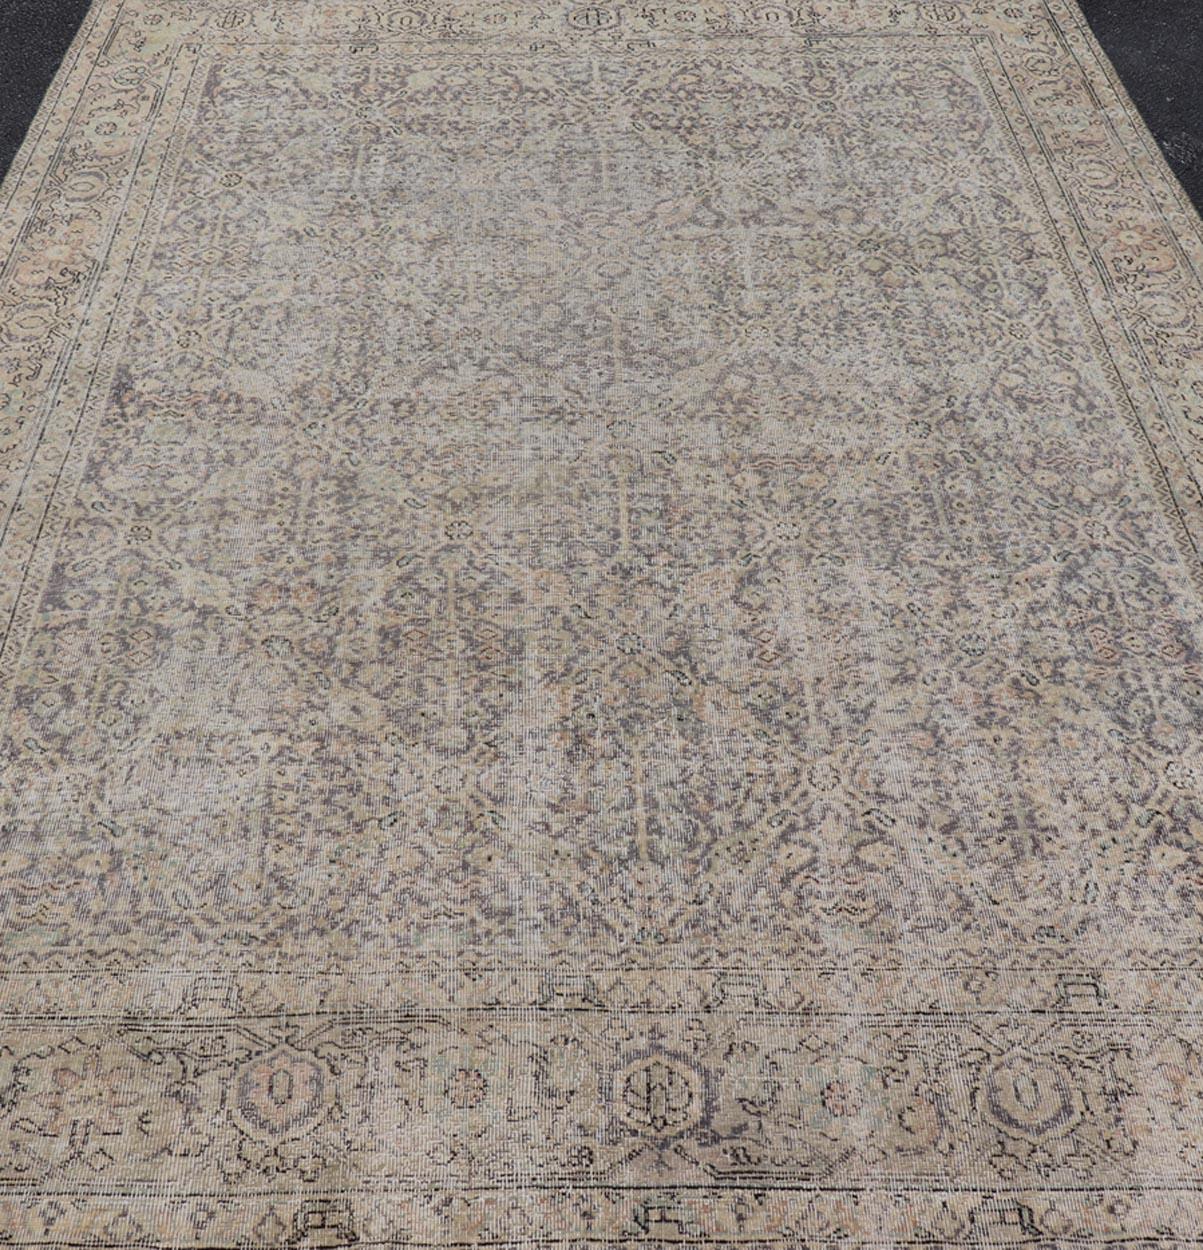 All-Over Vintage Turkish Distressed Rug in Cream, Lavender, Taupe, and Green. Keivan Woven Arts / rug EN-15415, country of origin / type: Turkey / Oushak, circa 1950.

Measures: 7'9 x 11'2 

This distressed rug Turkish vintage rug bears a light